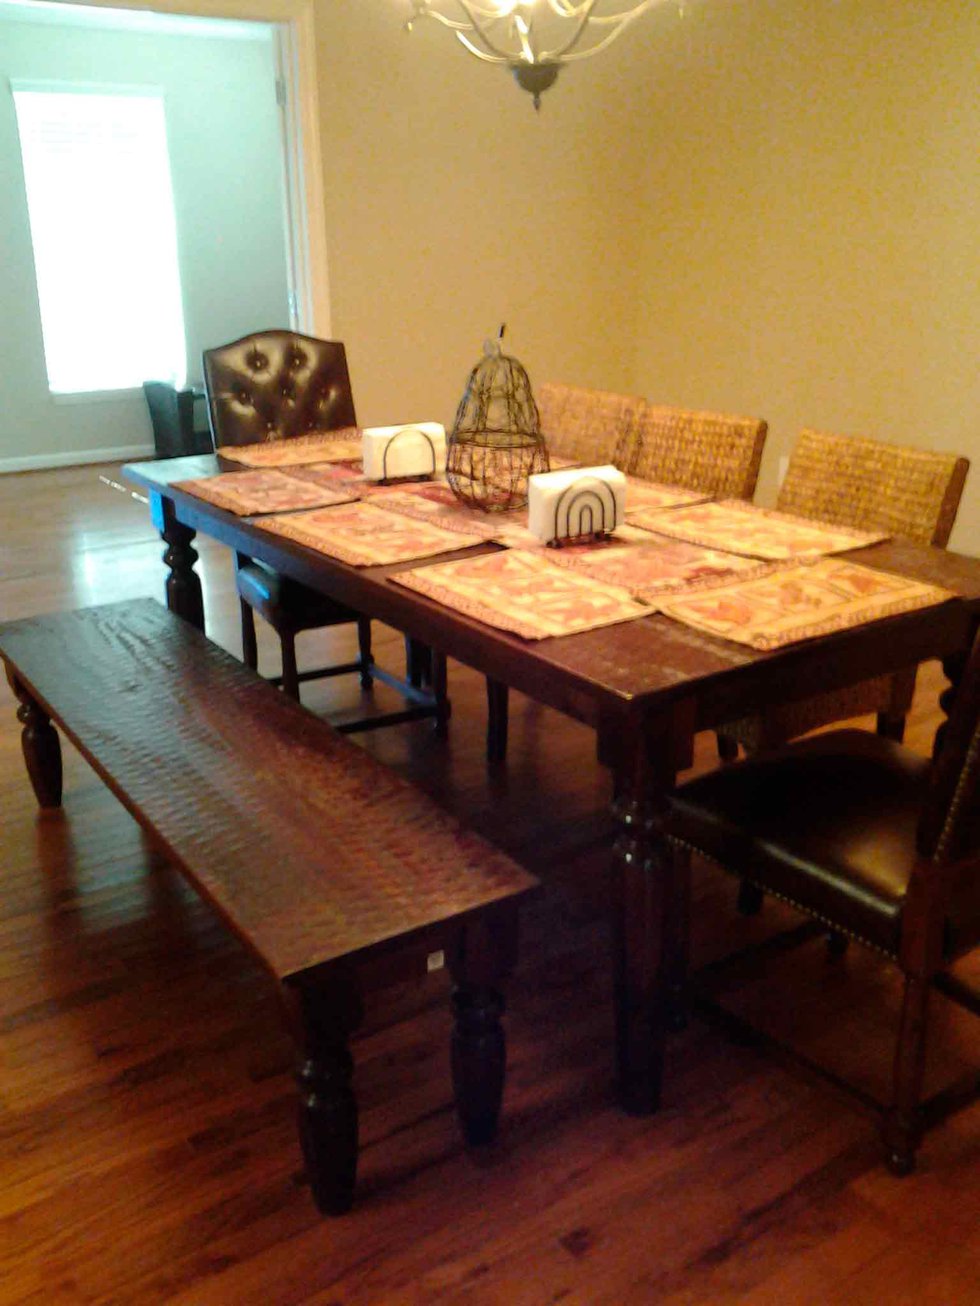 Bluff Park Promise Home table